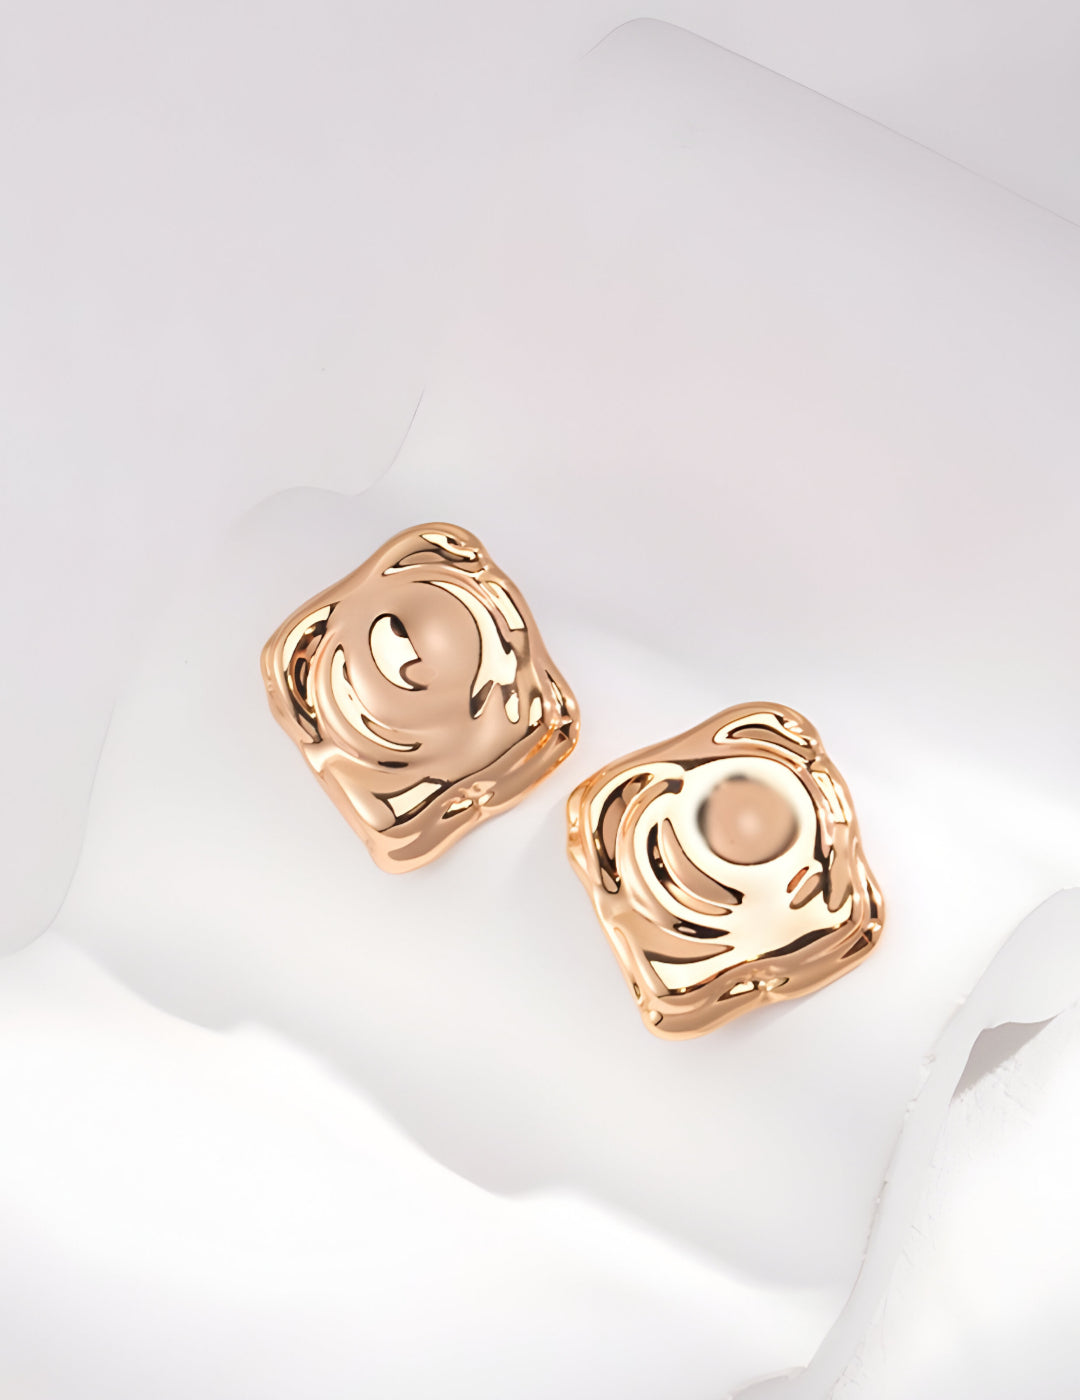 Capture the essence of nature - S925 Sterling Silver with 18K Gold Vermeil Earrings - create enchanting ripples - graceful movement of droplets